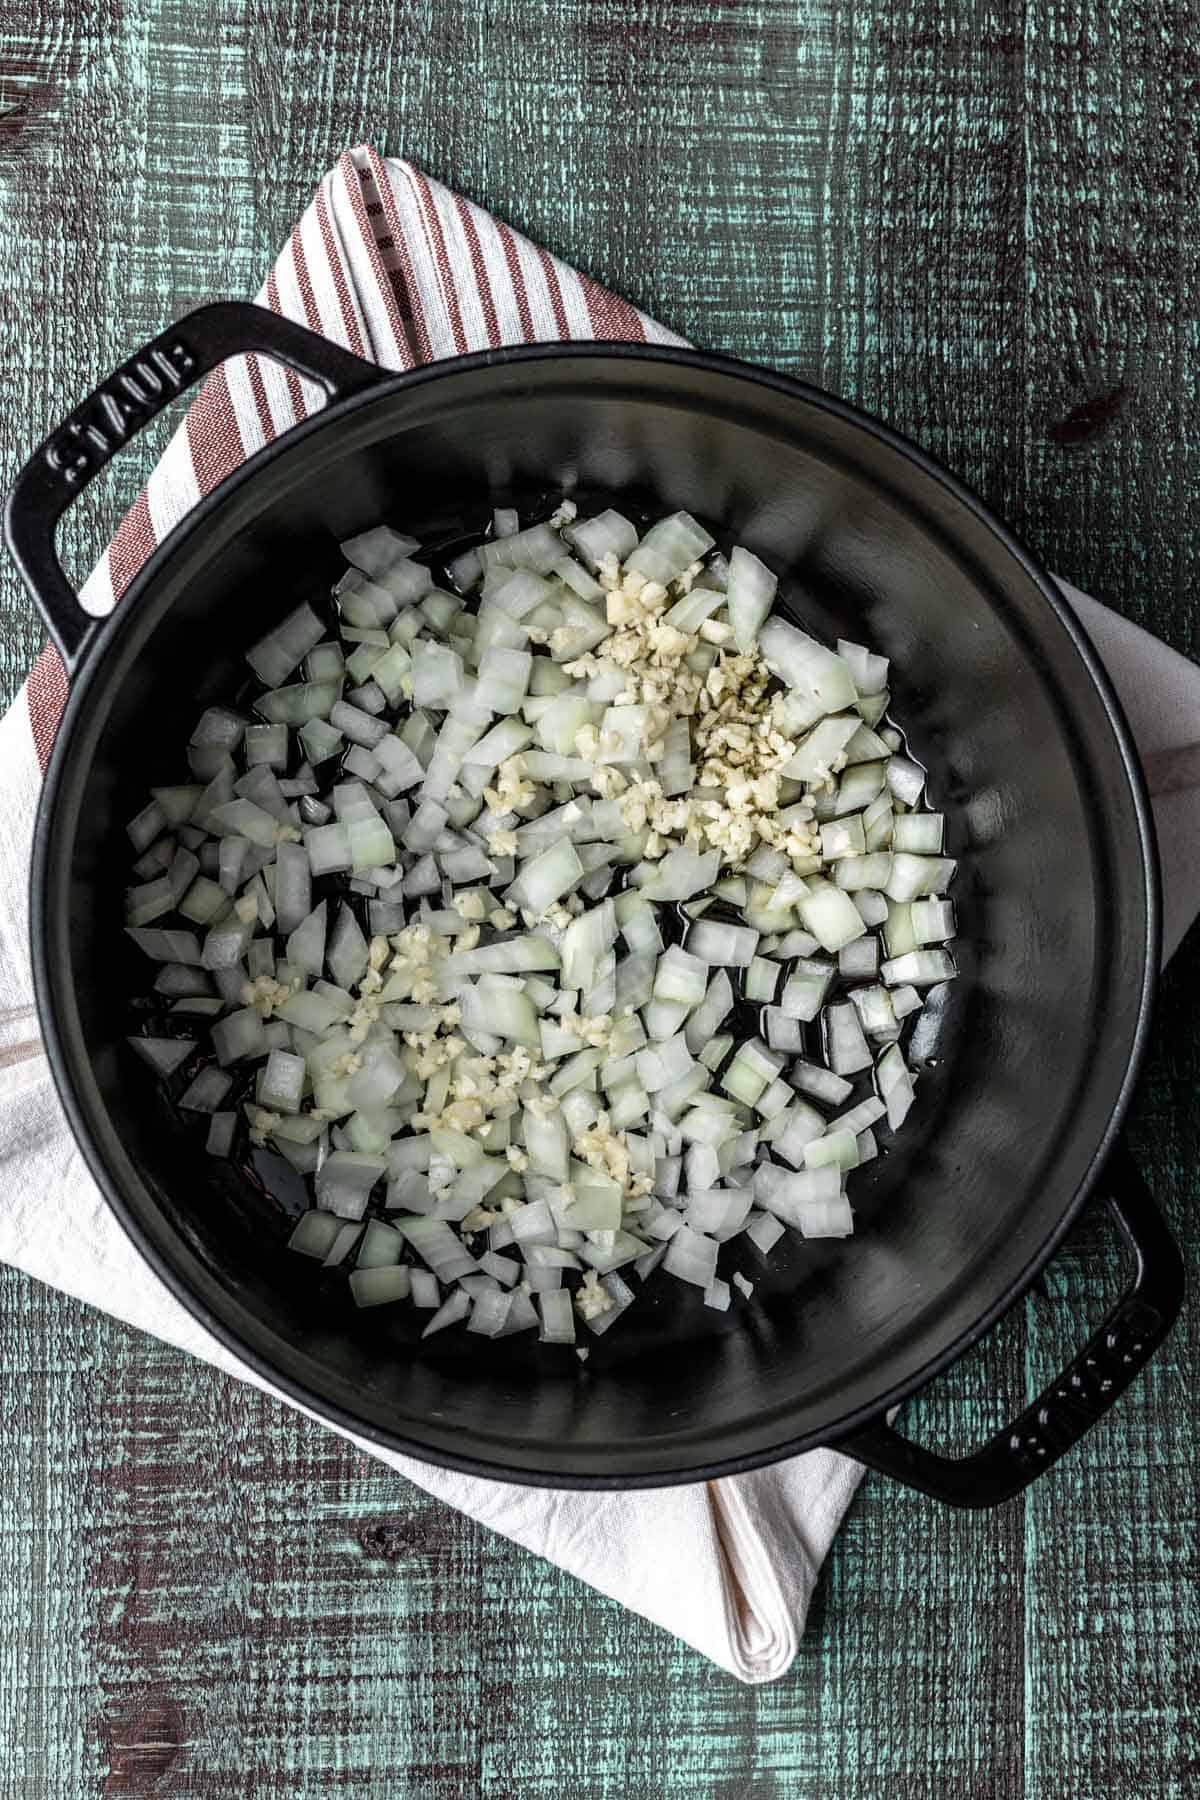 Onions and garlic sautéed in a large black pot.